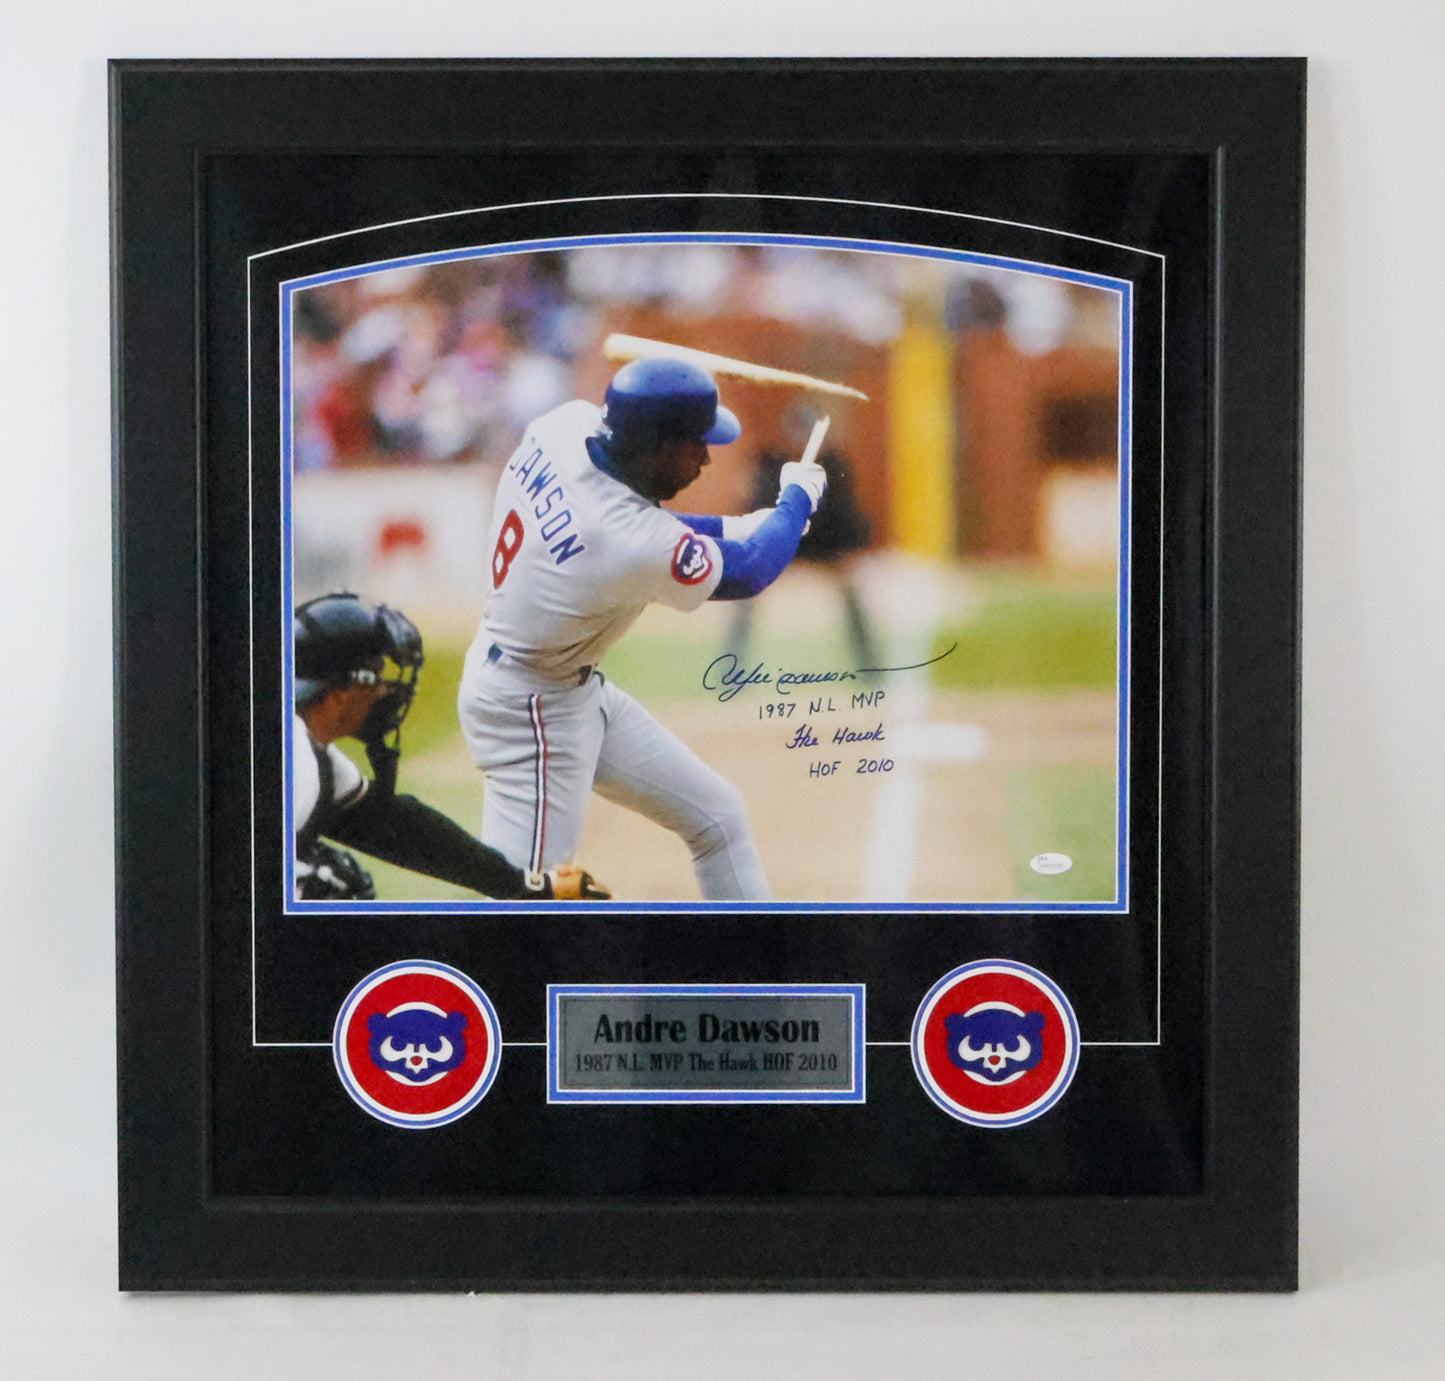 Andre Dawson Chicago Cubs Autographed 16"x20" Framed Photo - Latitude Sports Marketing